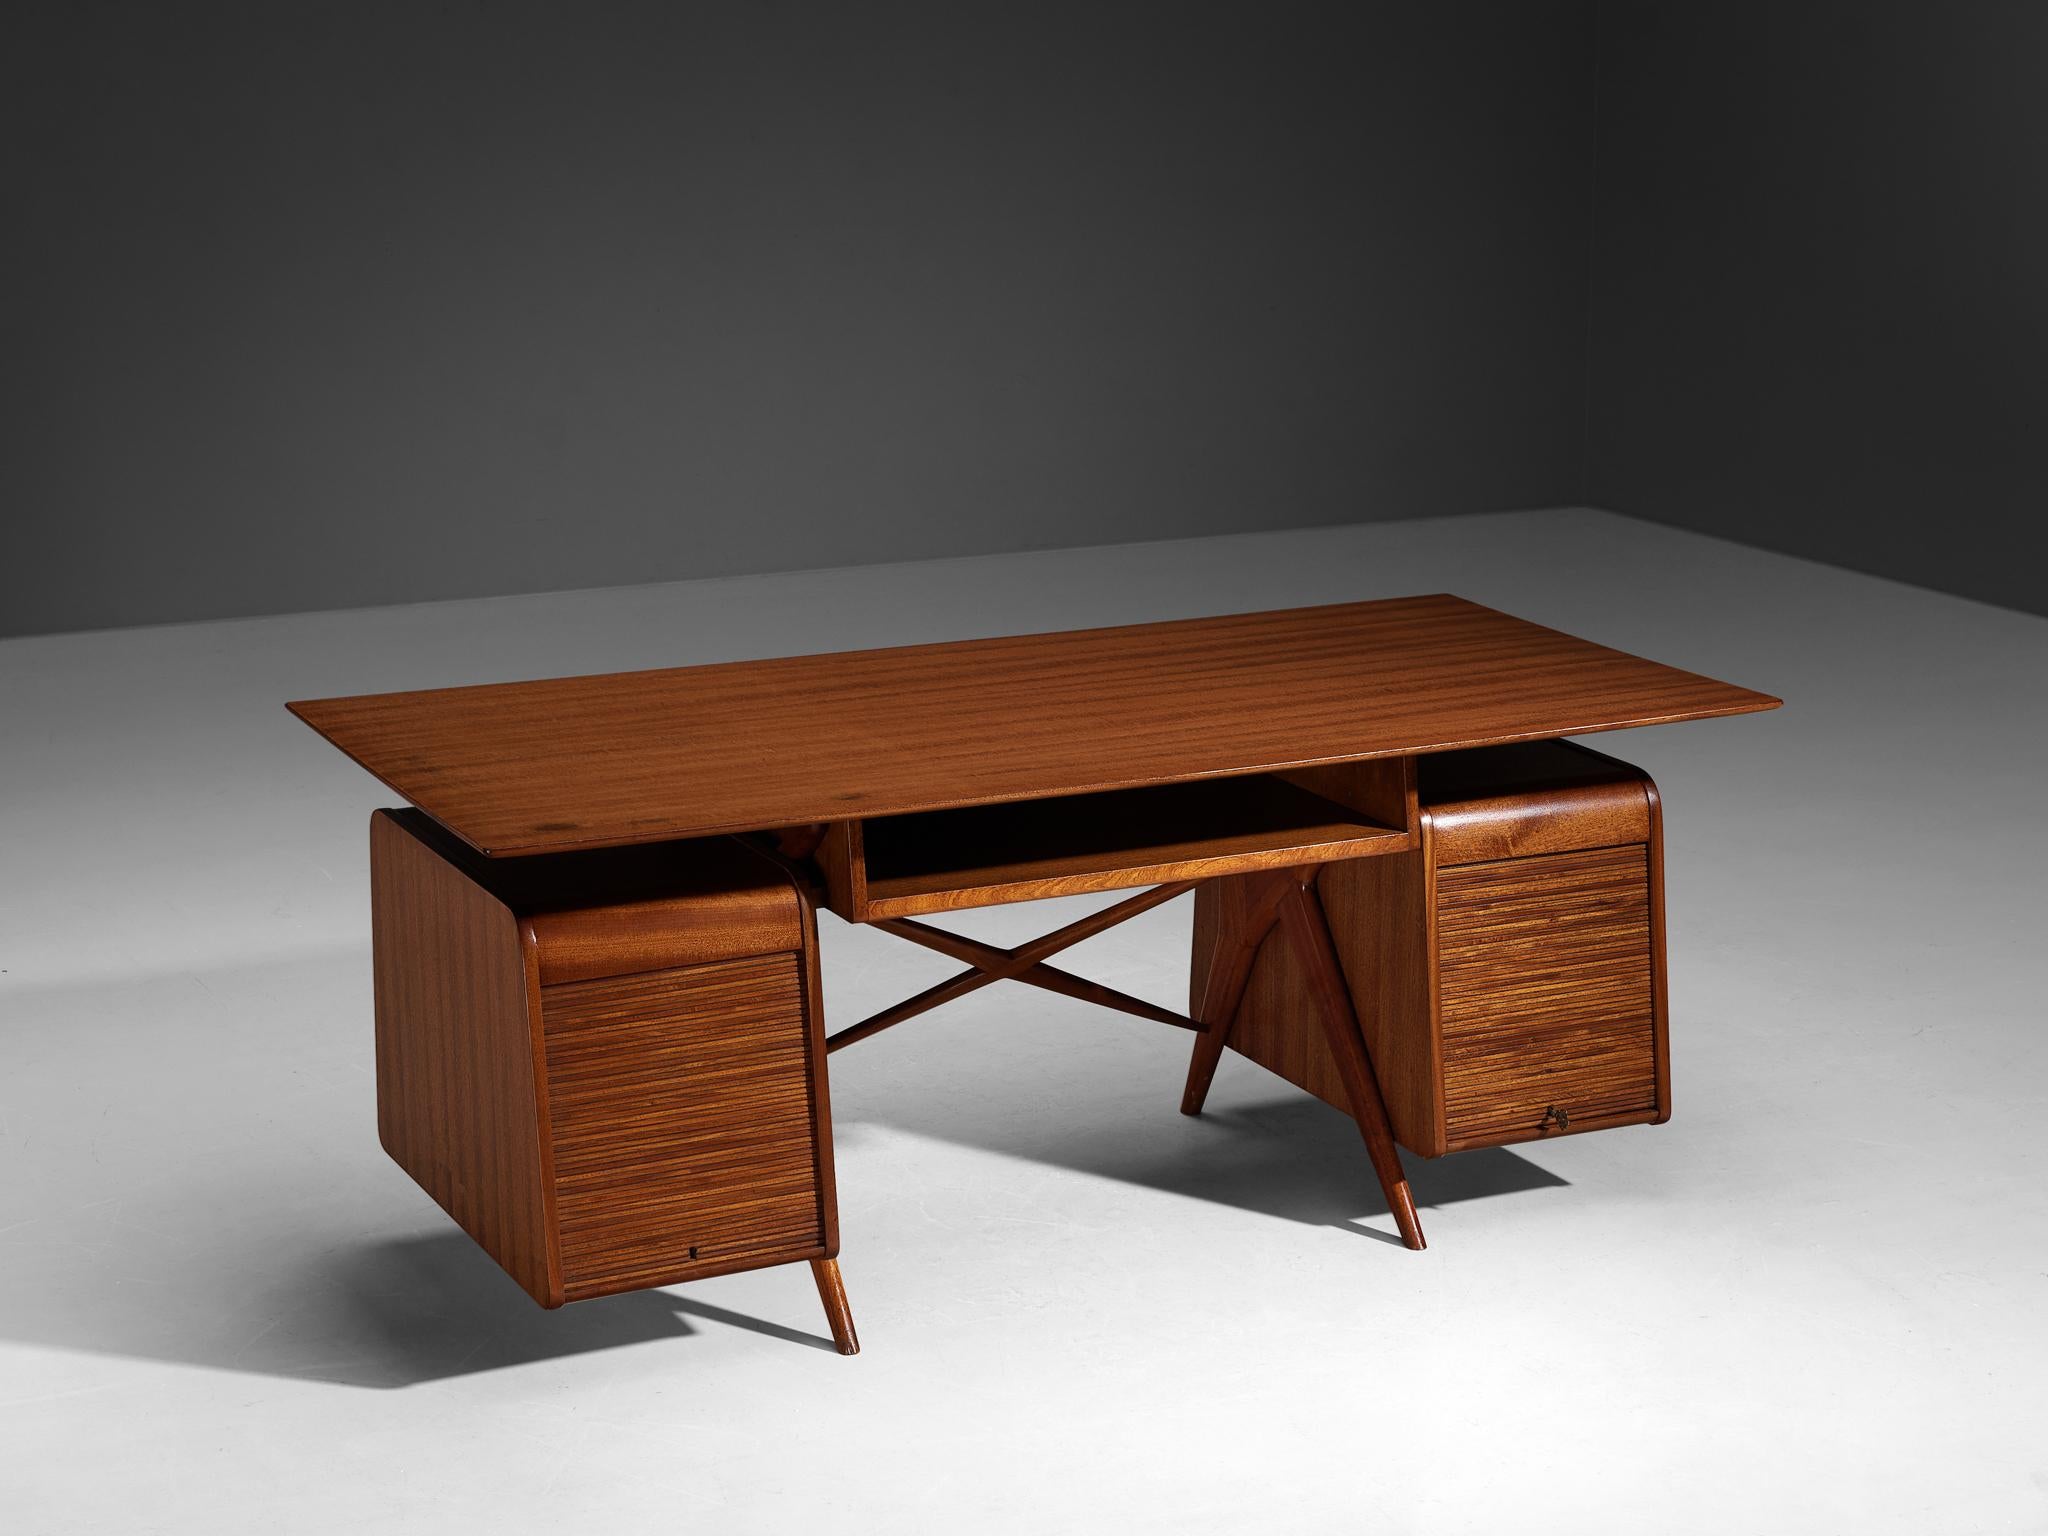 Silvio Cavatorta desk, mahogany, brass, Italy, design 1948-1949

Beautifully shaped desk in mahogany designed by Silvio Cavatorta in the late 1940s. The desk consists of a sleek top, cross shaped stretchers at the back and sides, and two cabinets